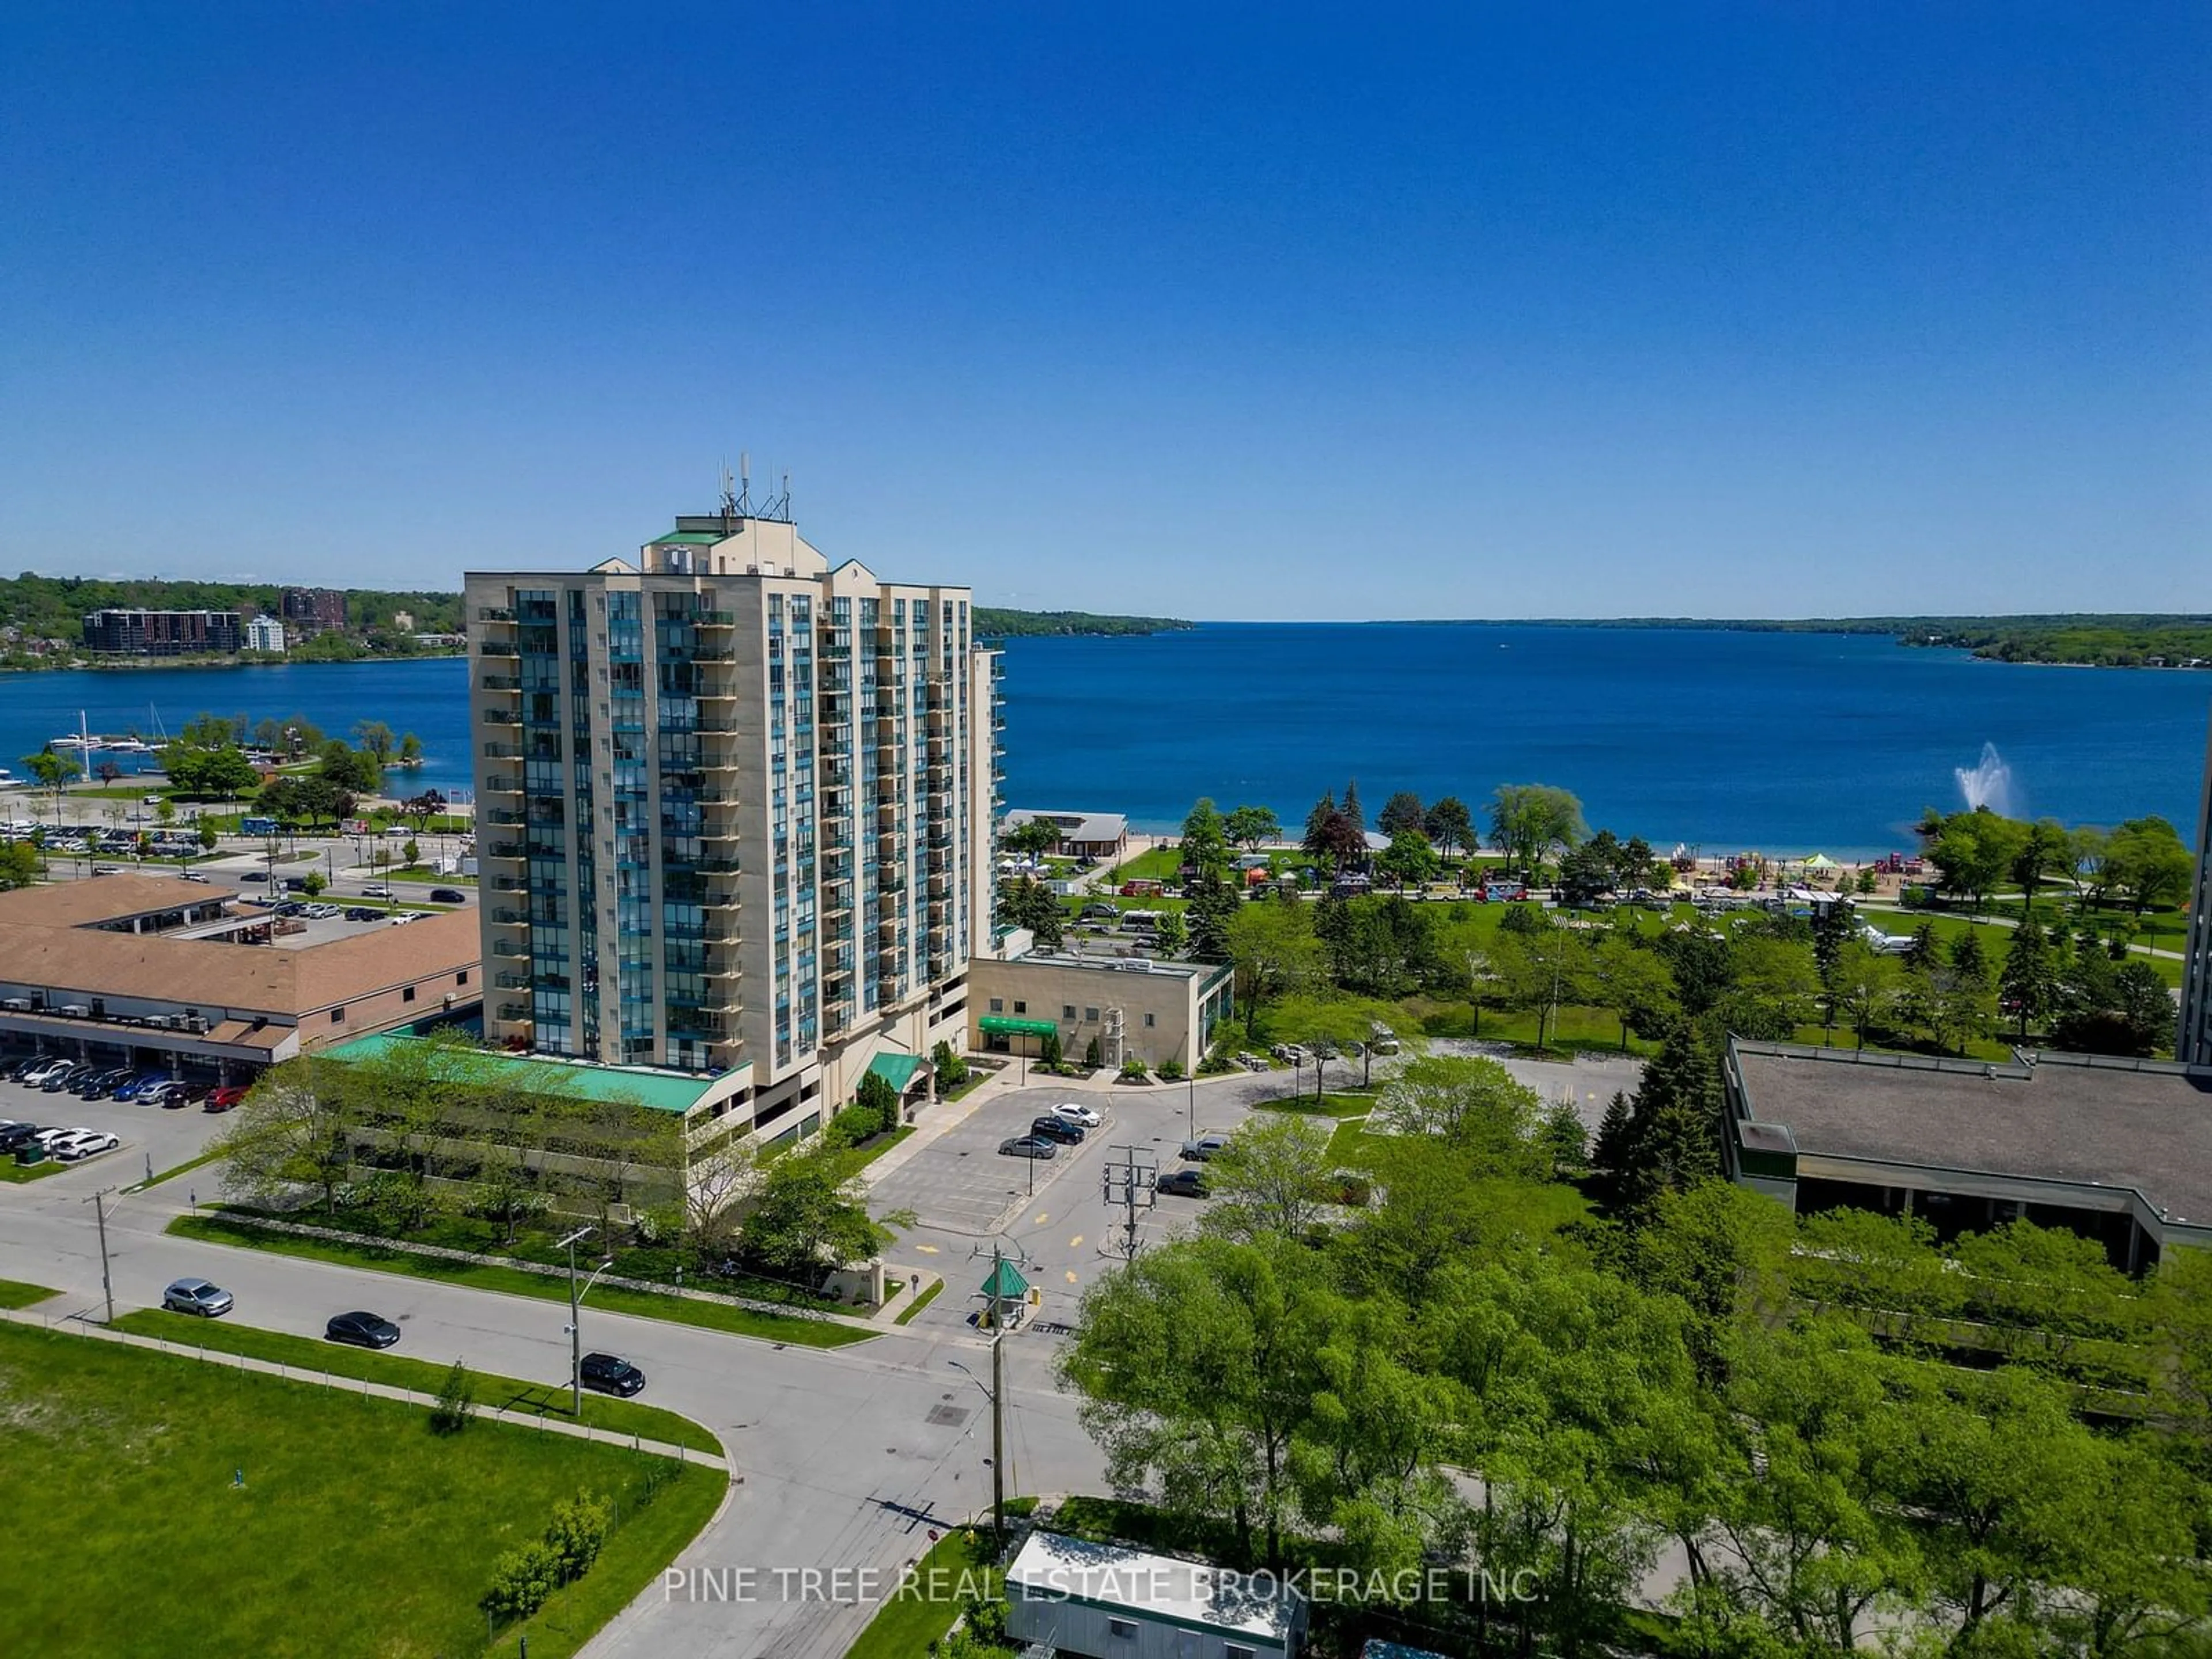 Lakeview for 65 Ellen St #208, Barrie Ontario L4N 3A5